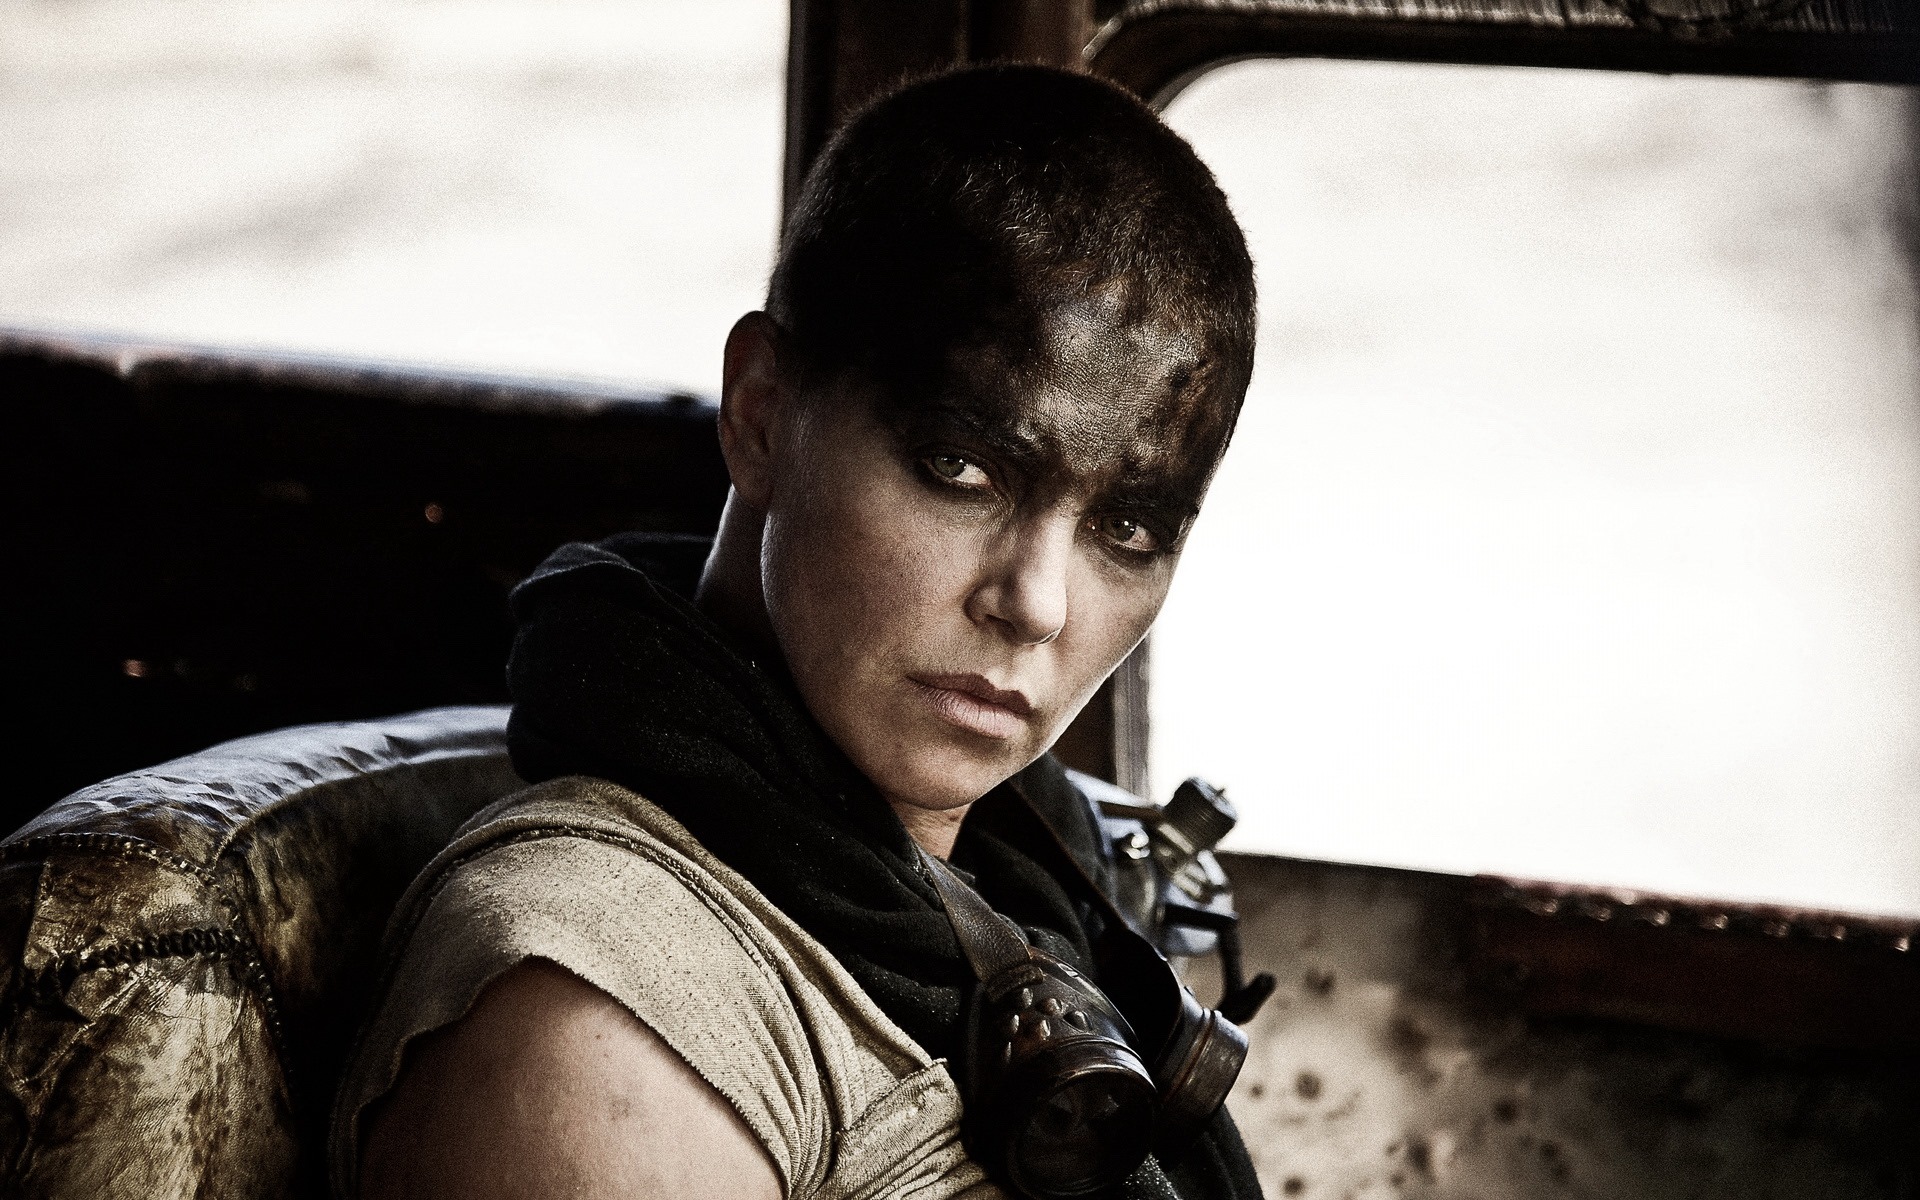 Mad Max: Fury Road, HD movie wallpapers #43 - 1920x1200